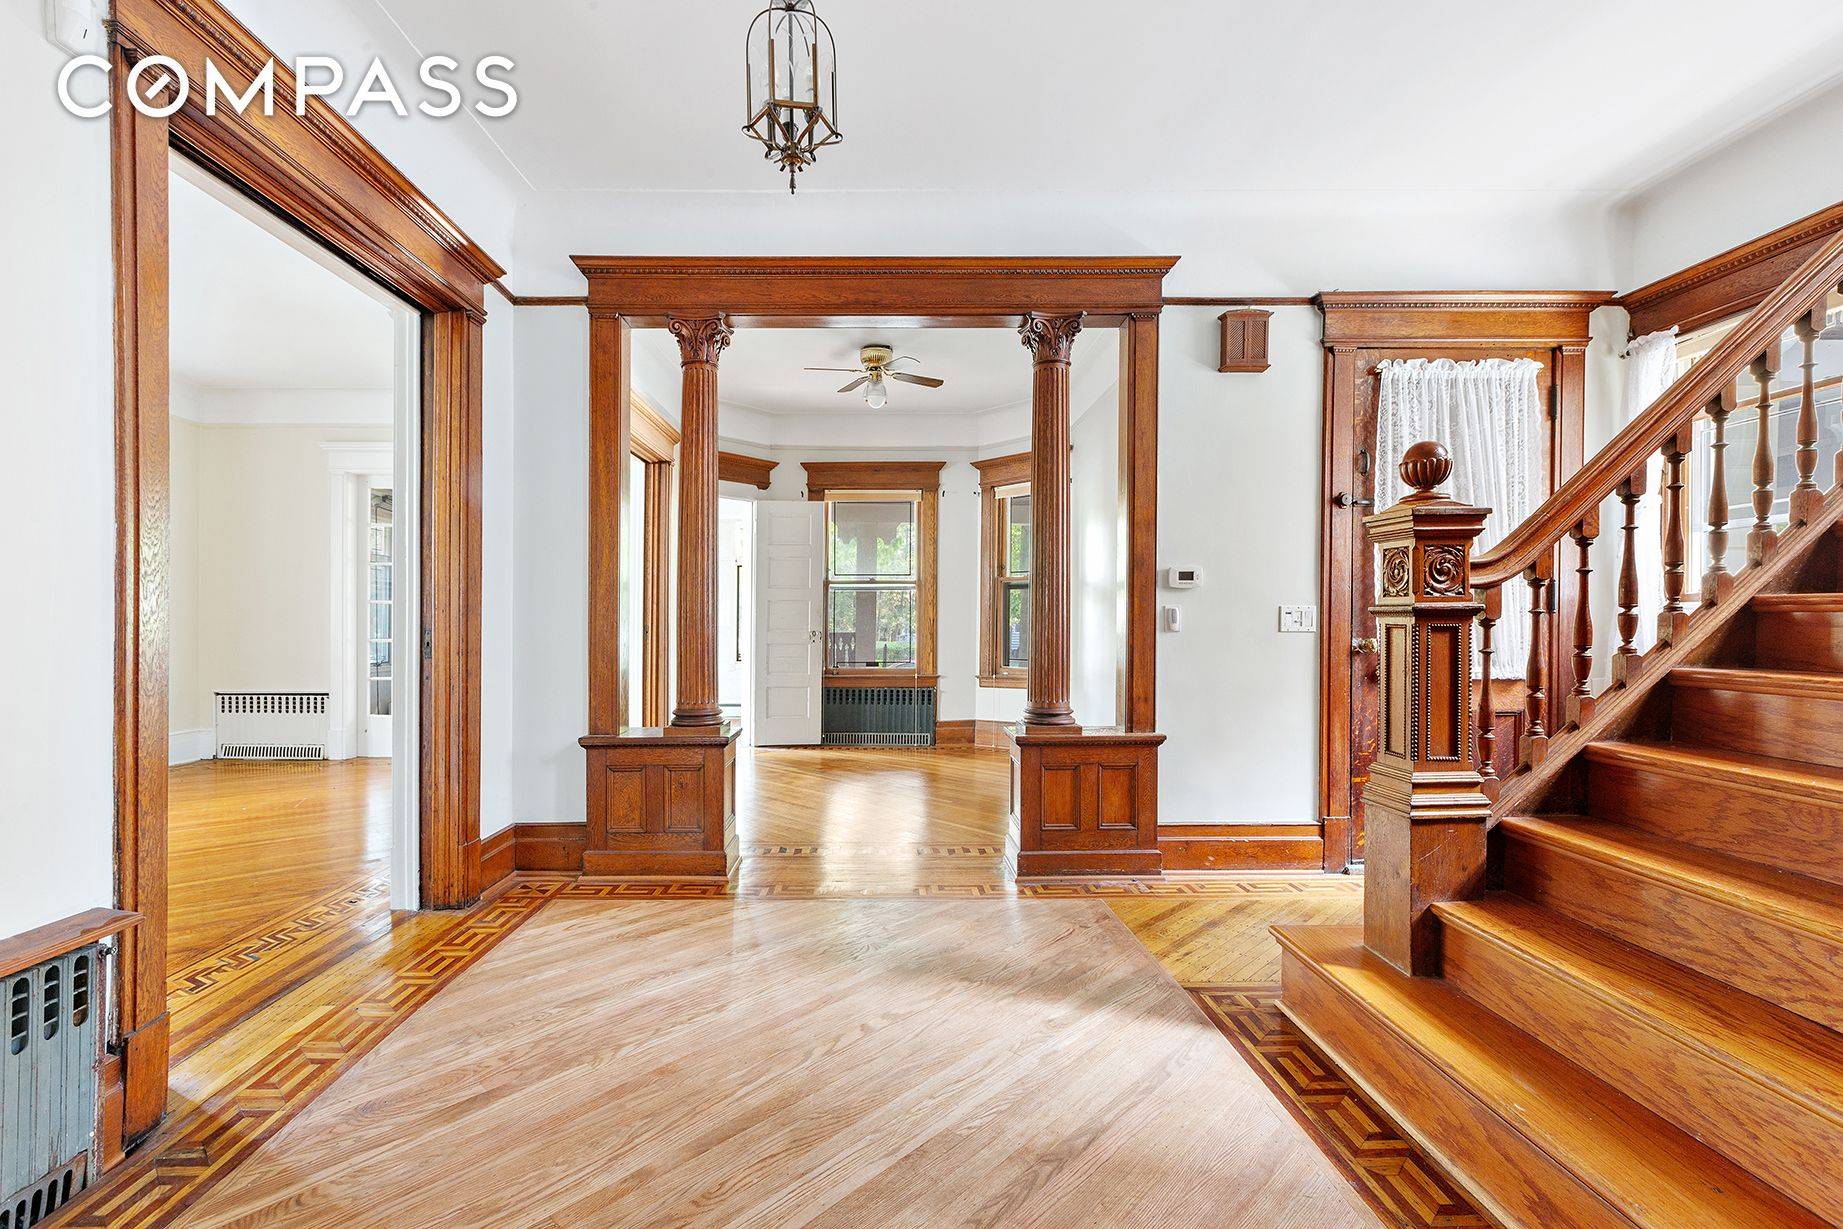 A landmarked Ditmas Park residence of character and distinction.